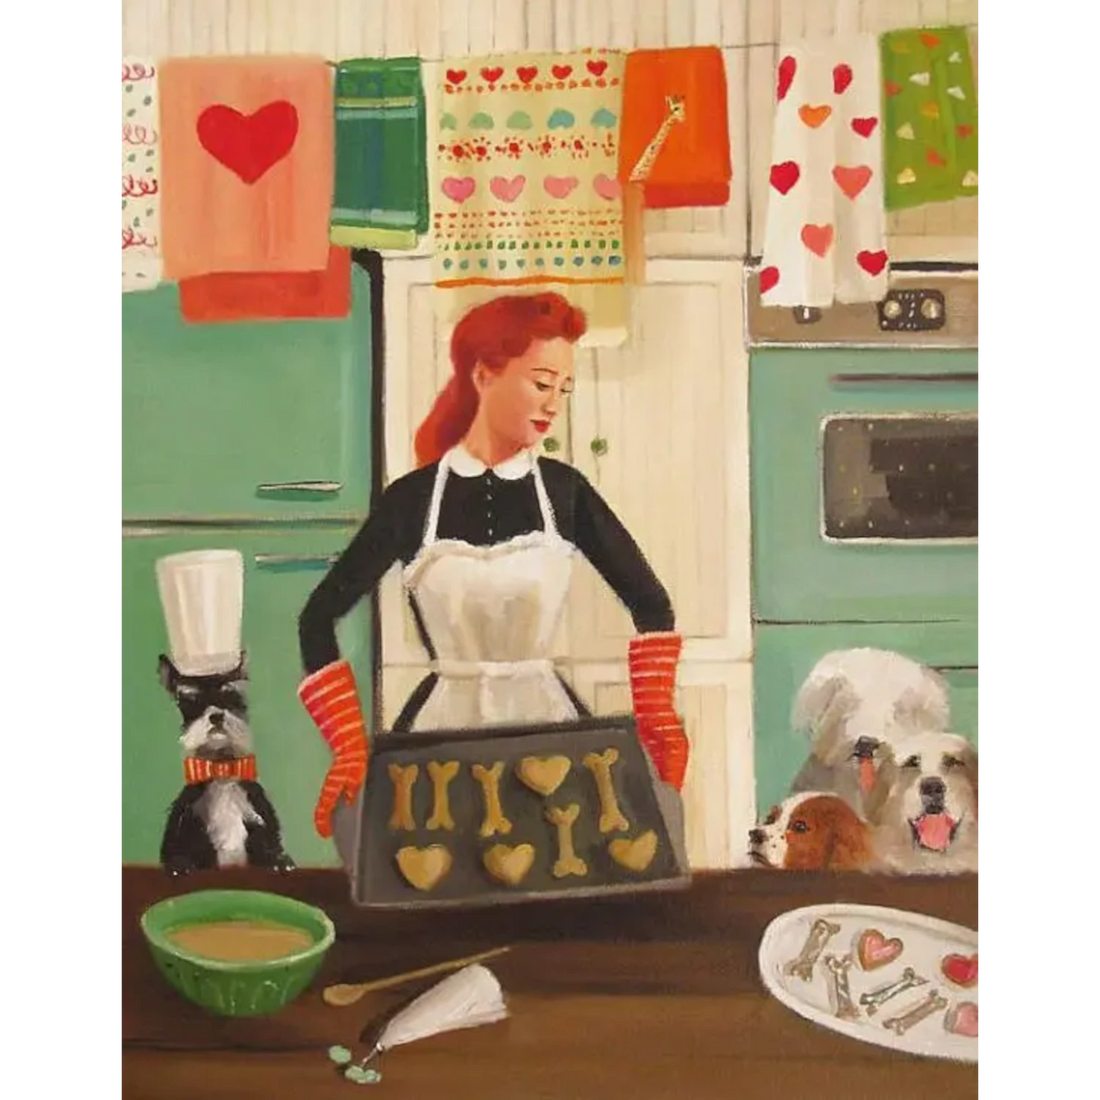 A painting by Janet Hill of a woman taking baked goods out of the oven, with three eager dogs watching featuring a Miss Moon Lesson Fifteen Small Art Print.